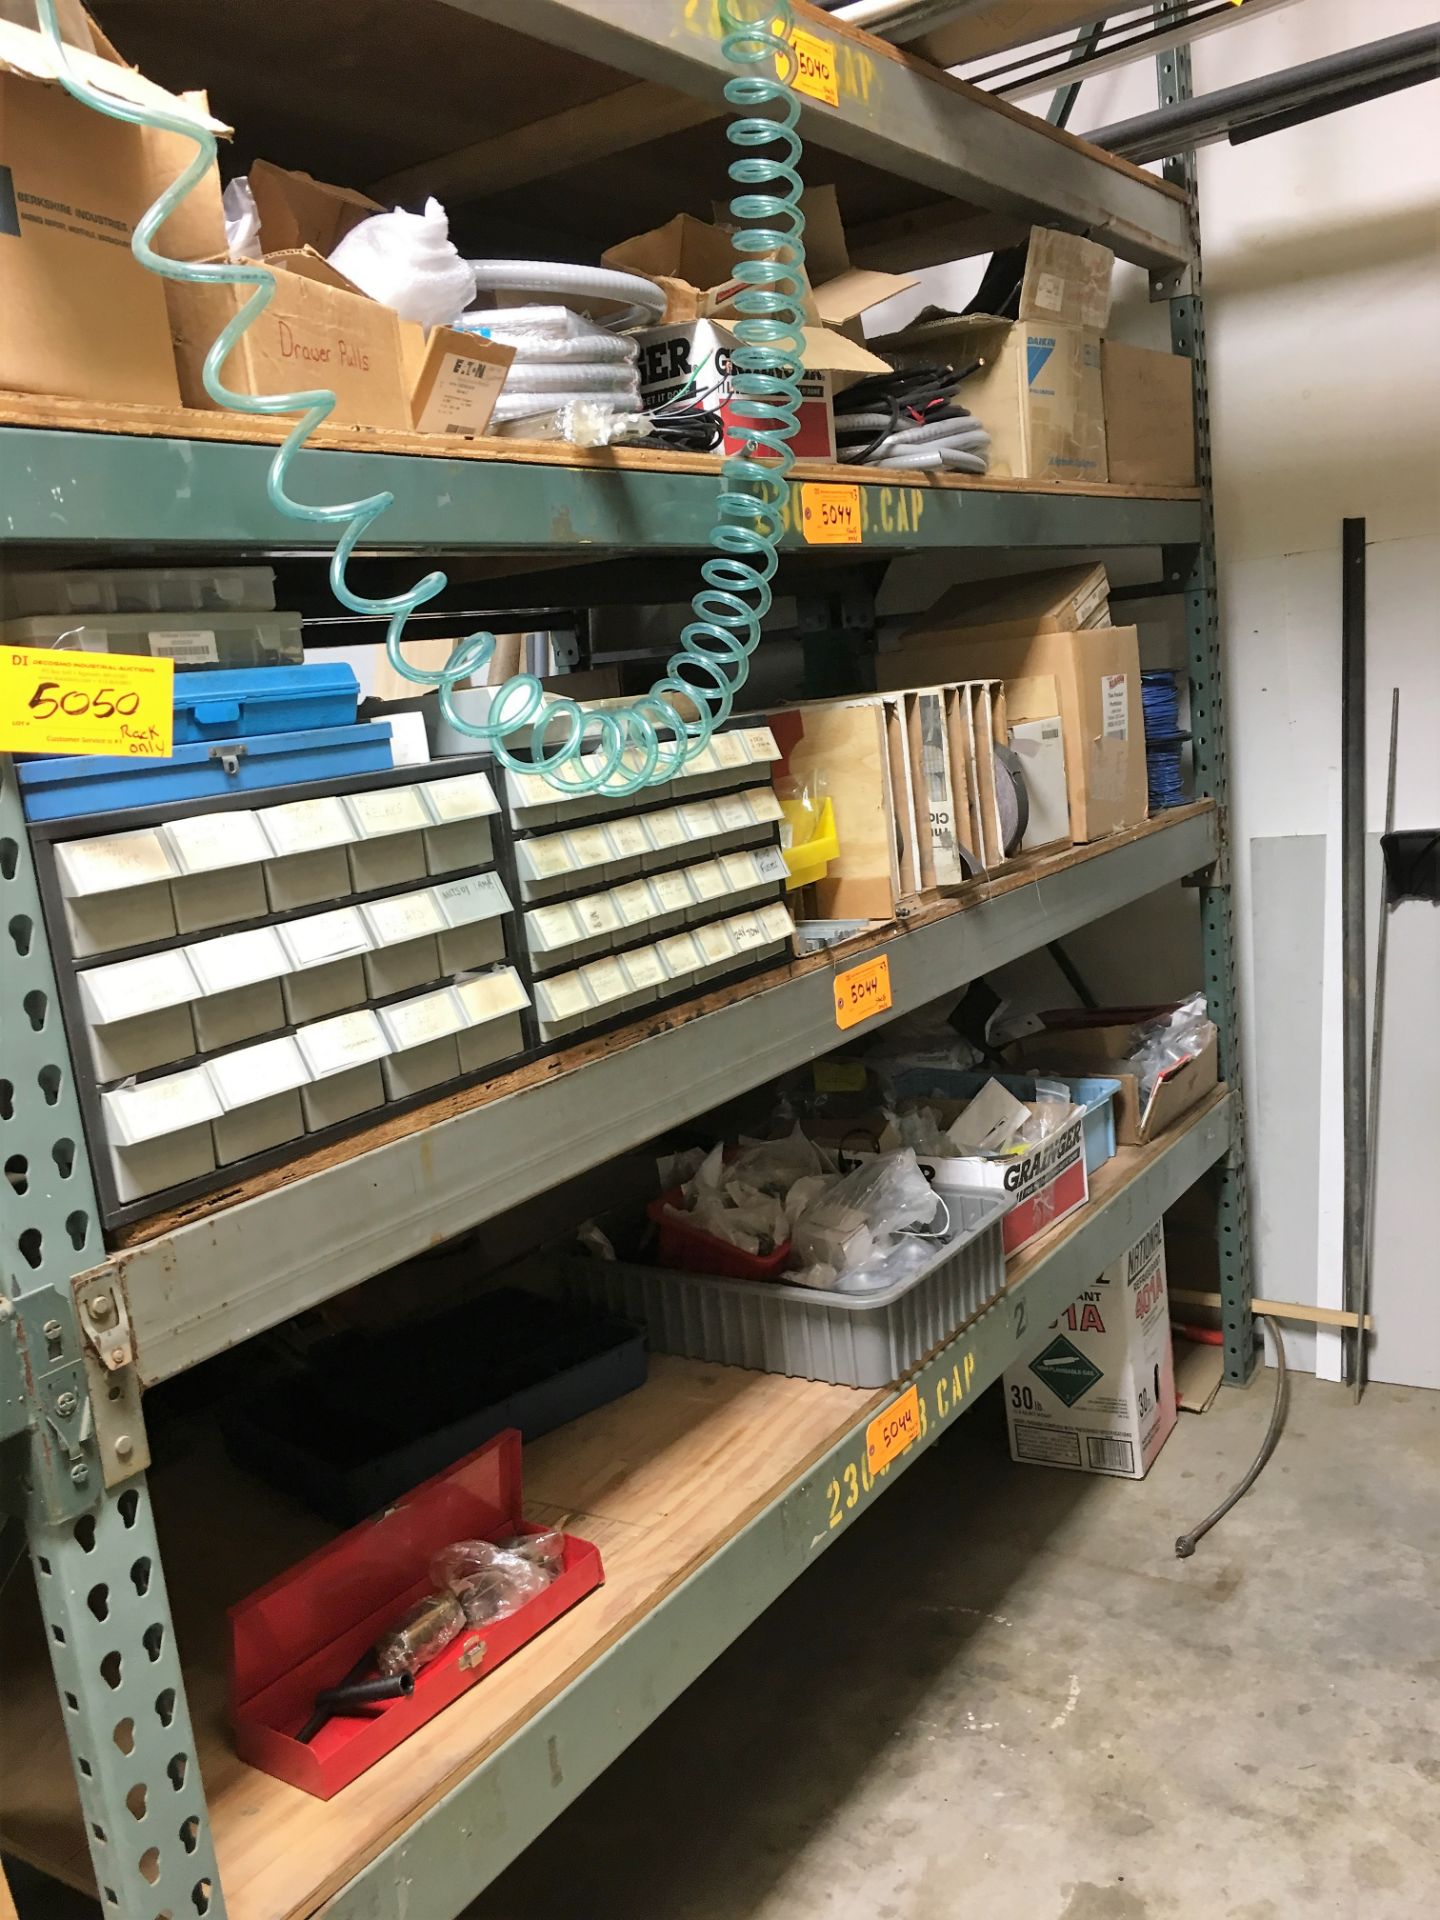 CONTENTS OF SHELF: CABLING & ELECTRICAL SUPPLIES